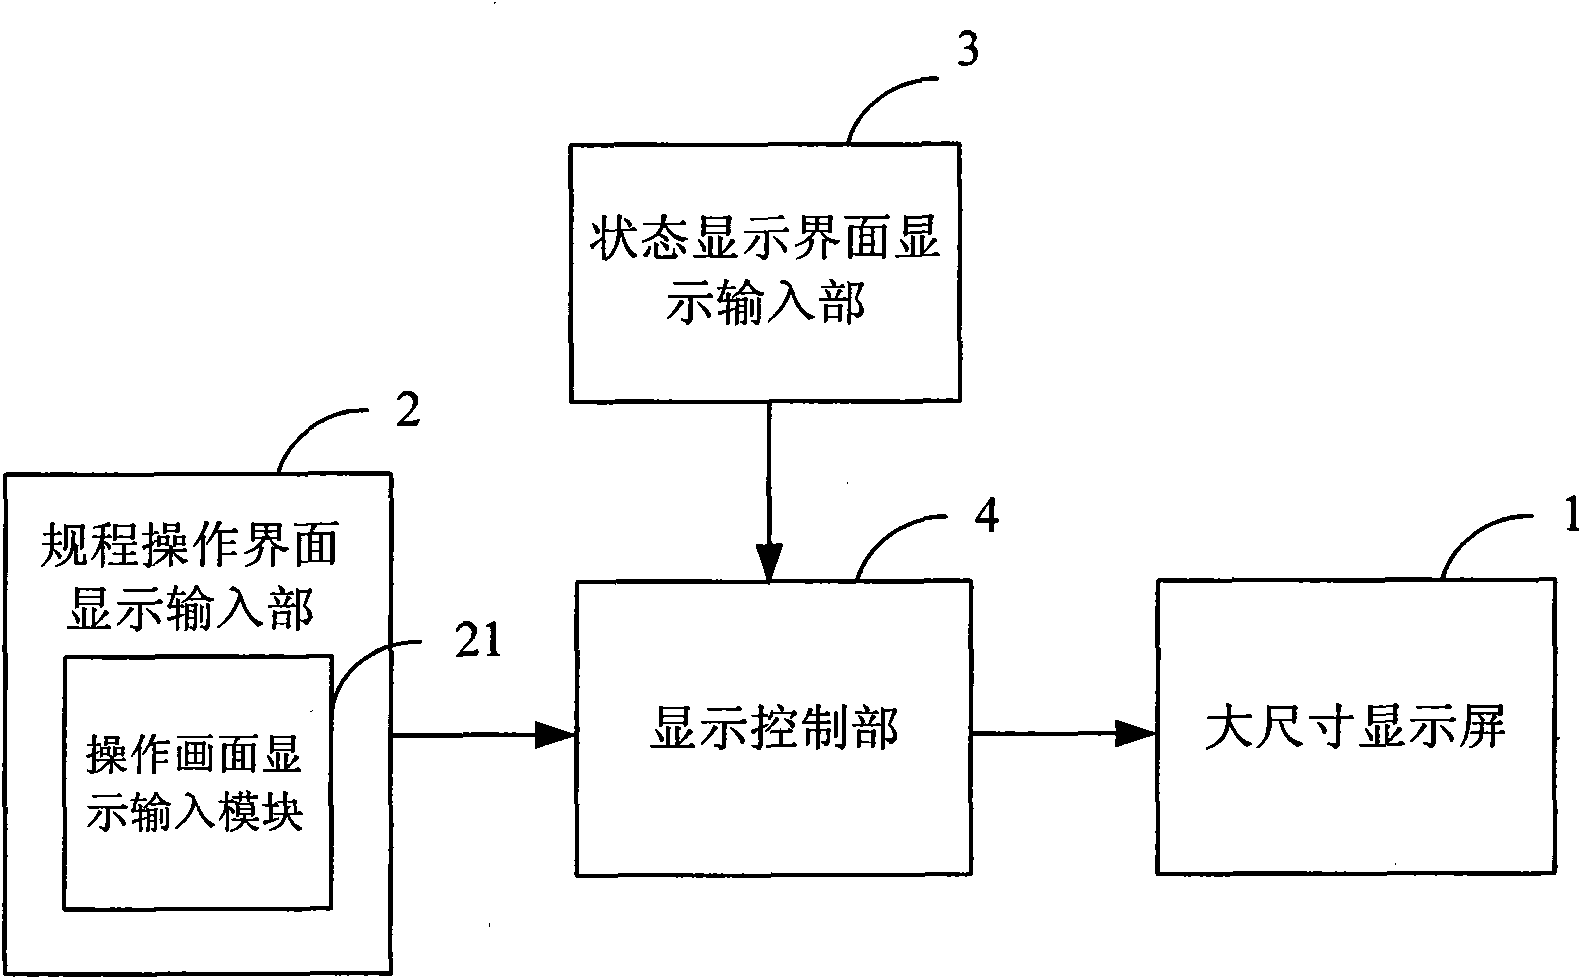 Display device of digital procedures human-machine interfaces in nuclear power station and display control method thereof